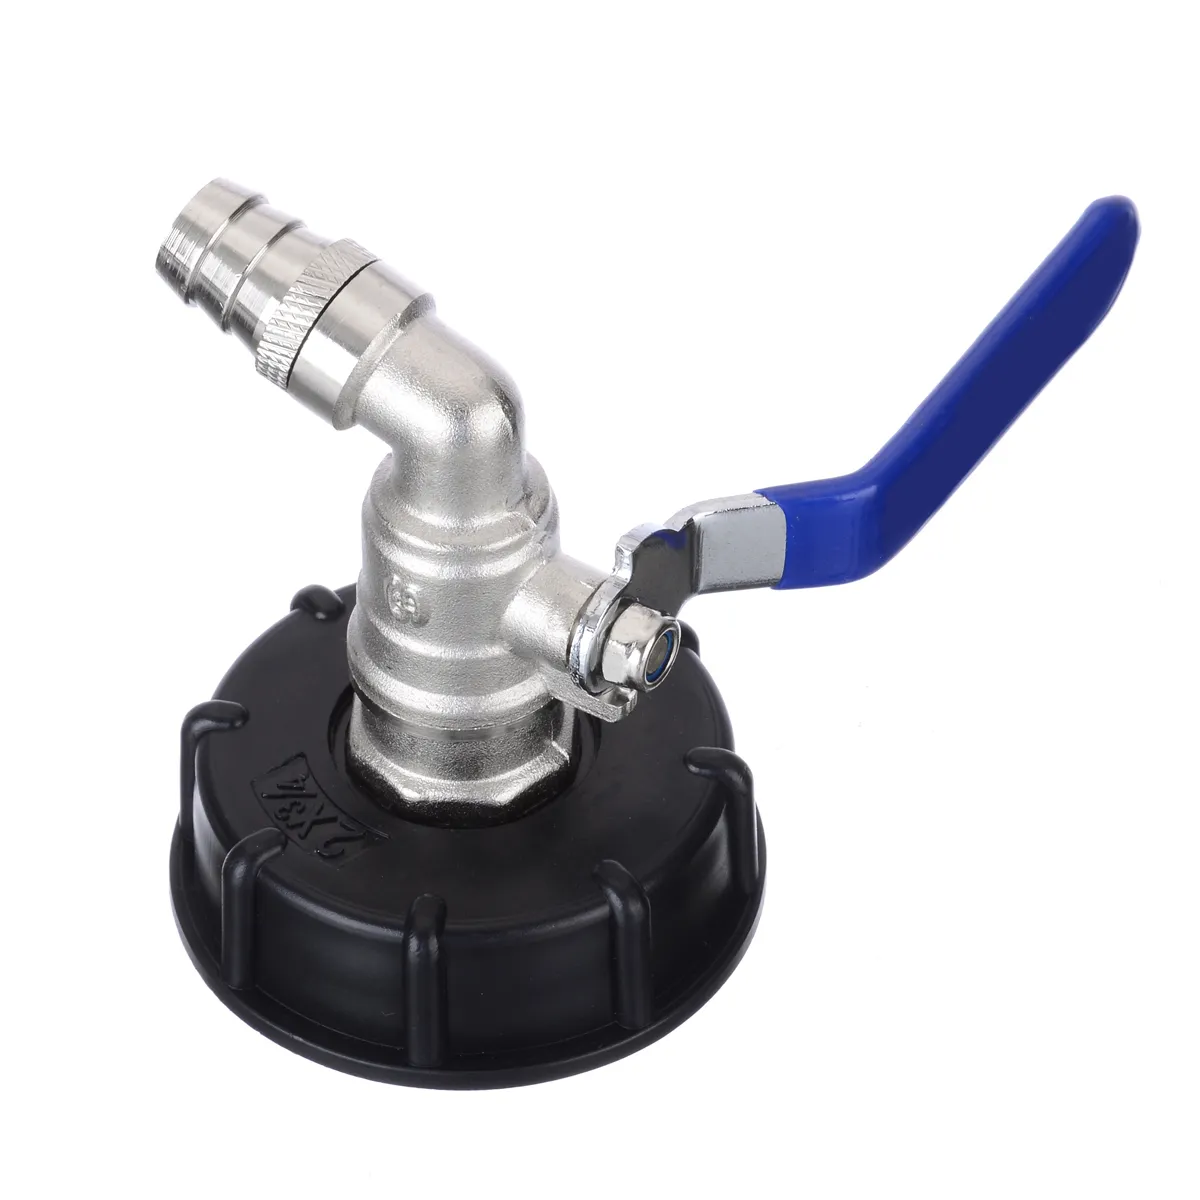 IBC Ball Outlet Tap Tank 3/4 Food Grade Drain Adapter S60x6 1000 L Tank Rainwater Container Brass Hose Faucet Valve